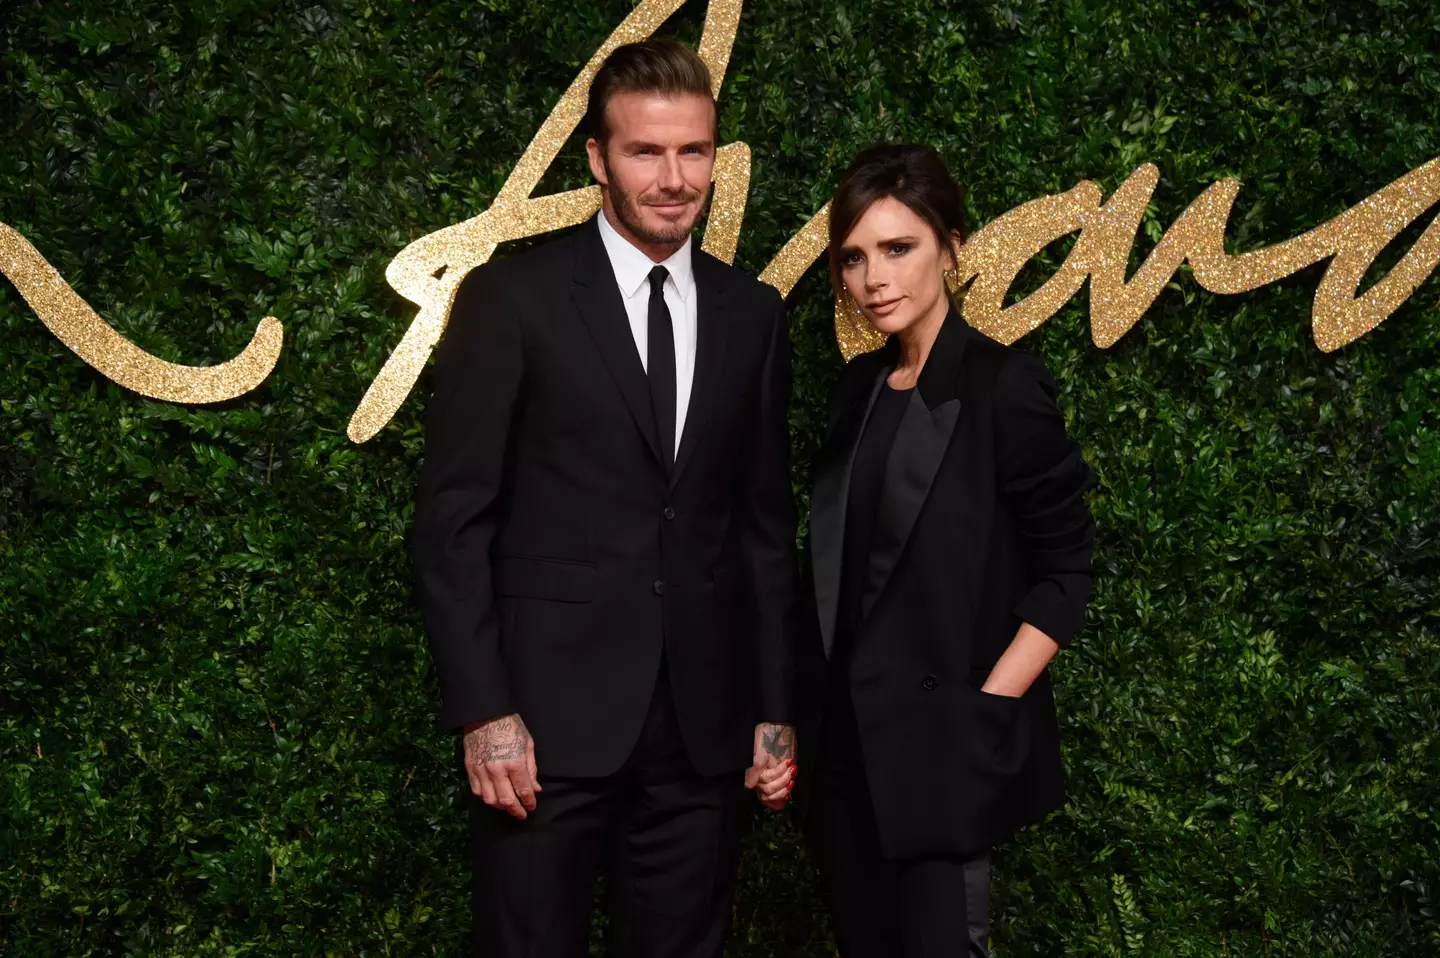 David Beckham spoke about his wife's staple meal on a podcast last year.